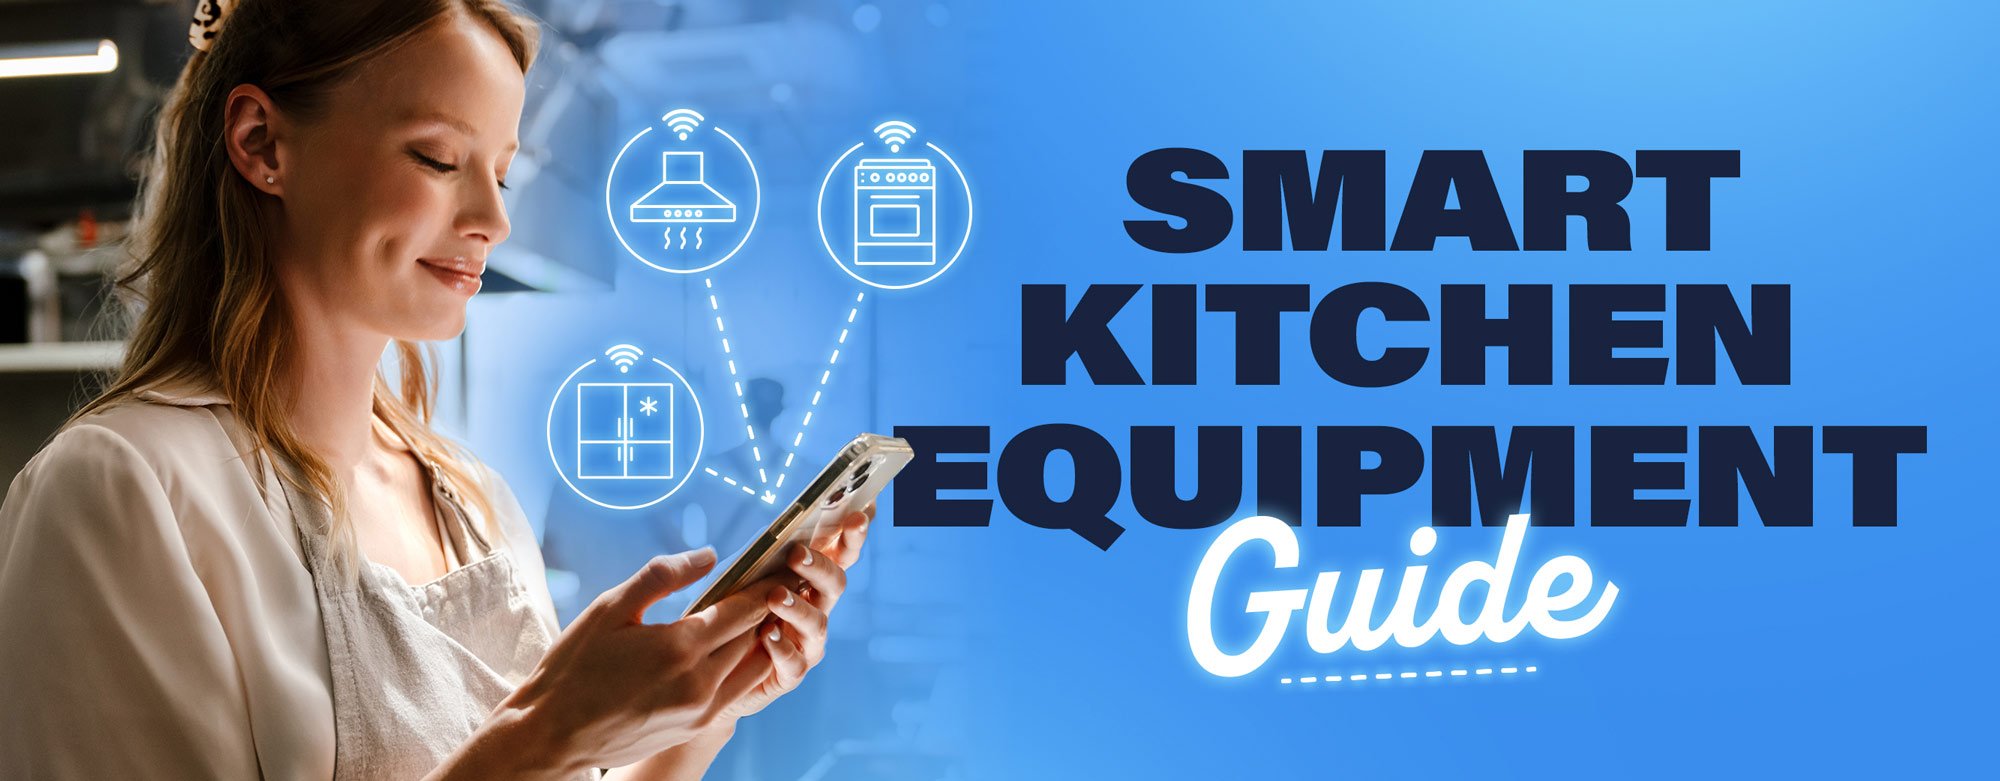 A Guide to Temperature Control - Foodservice Equipment & Supplies